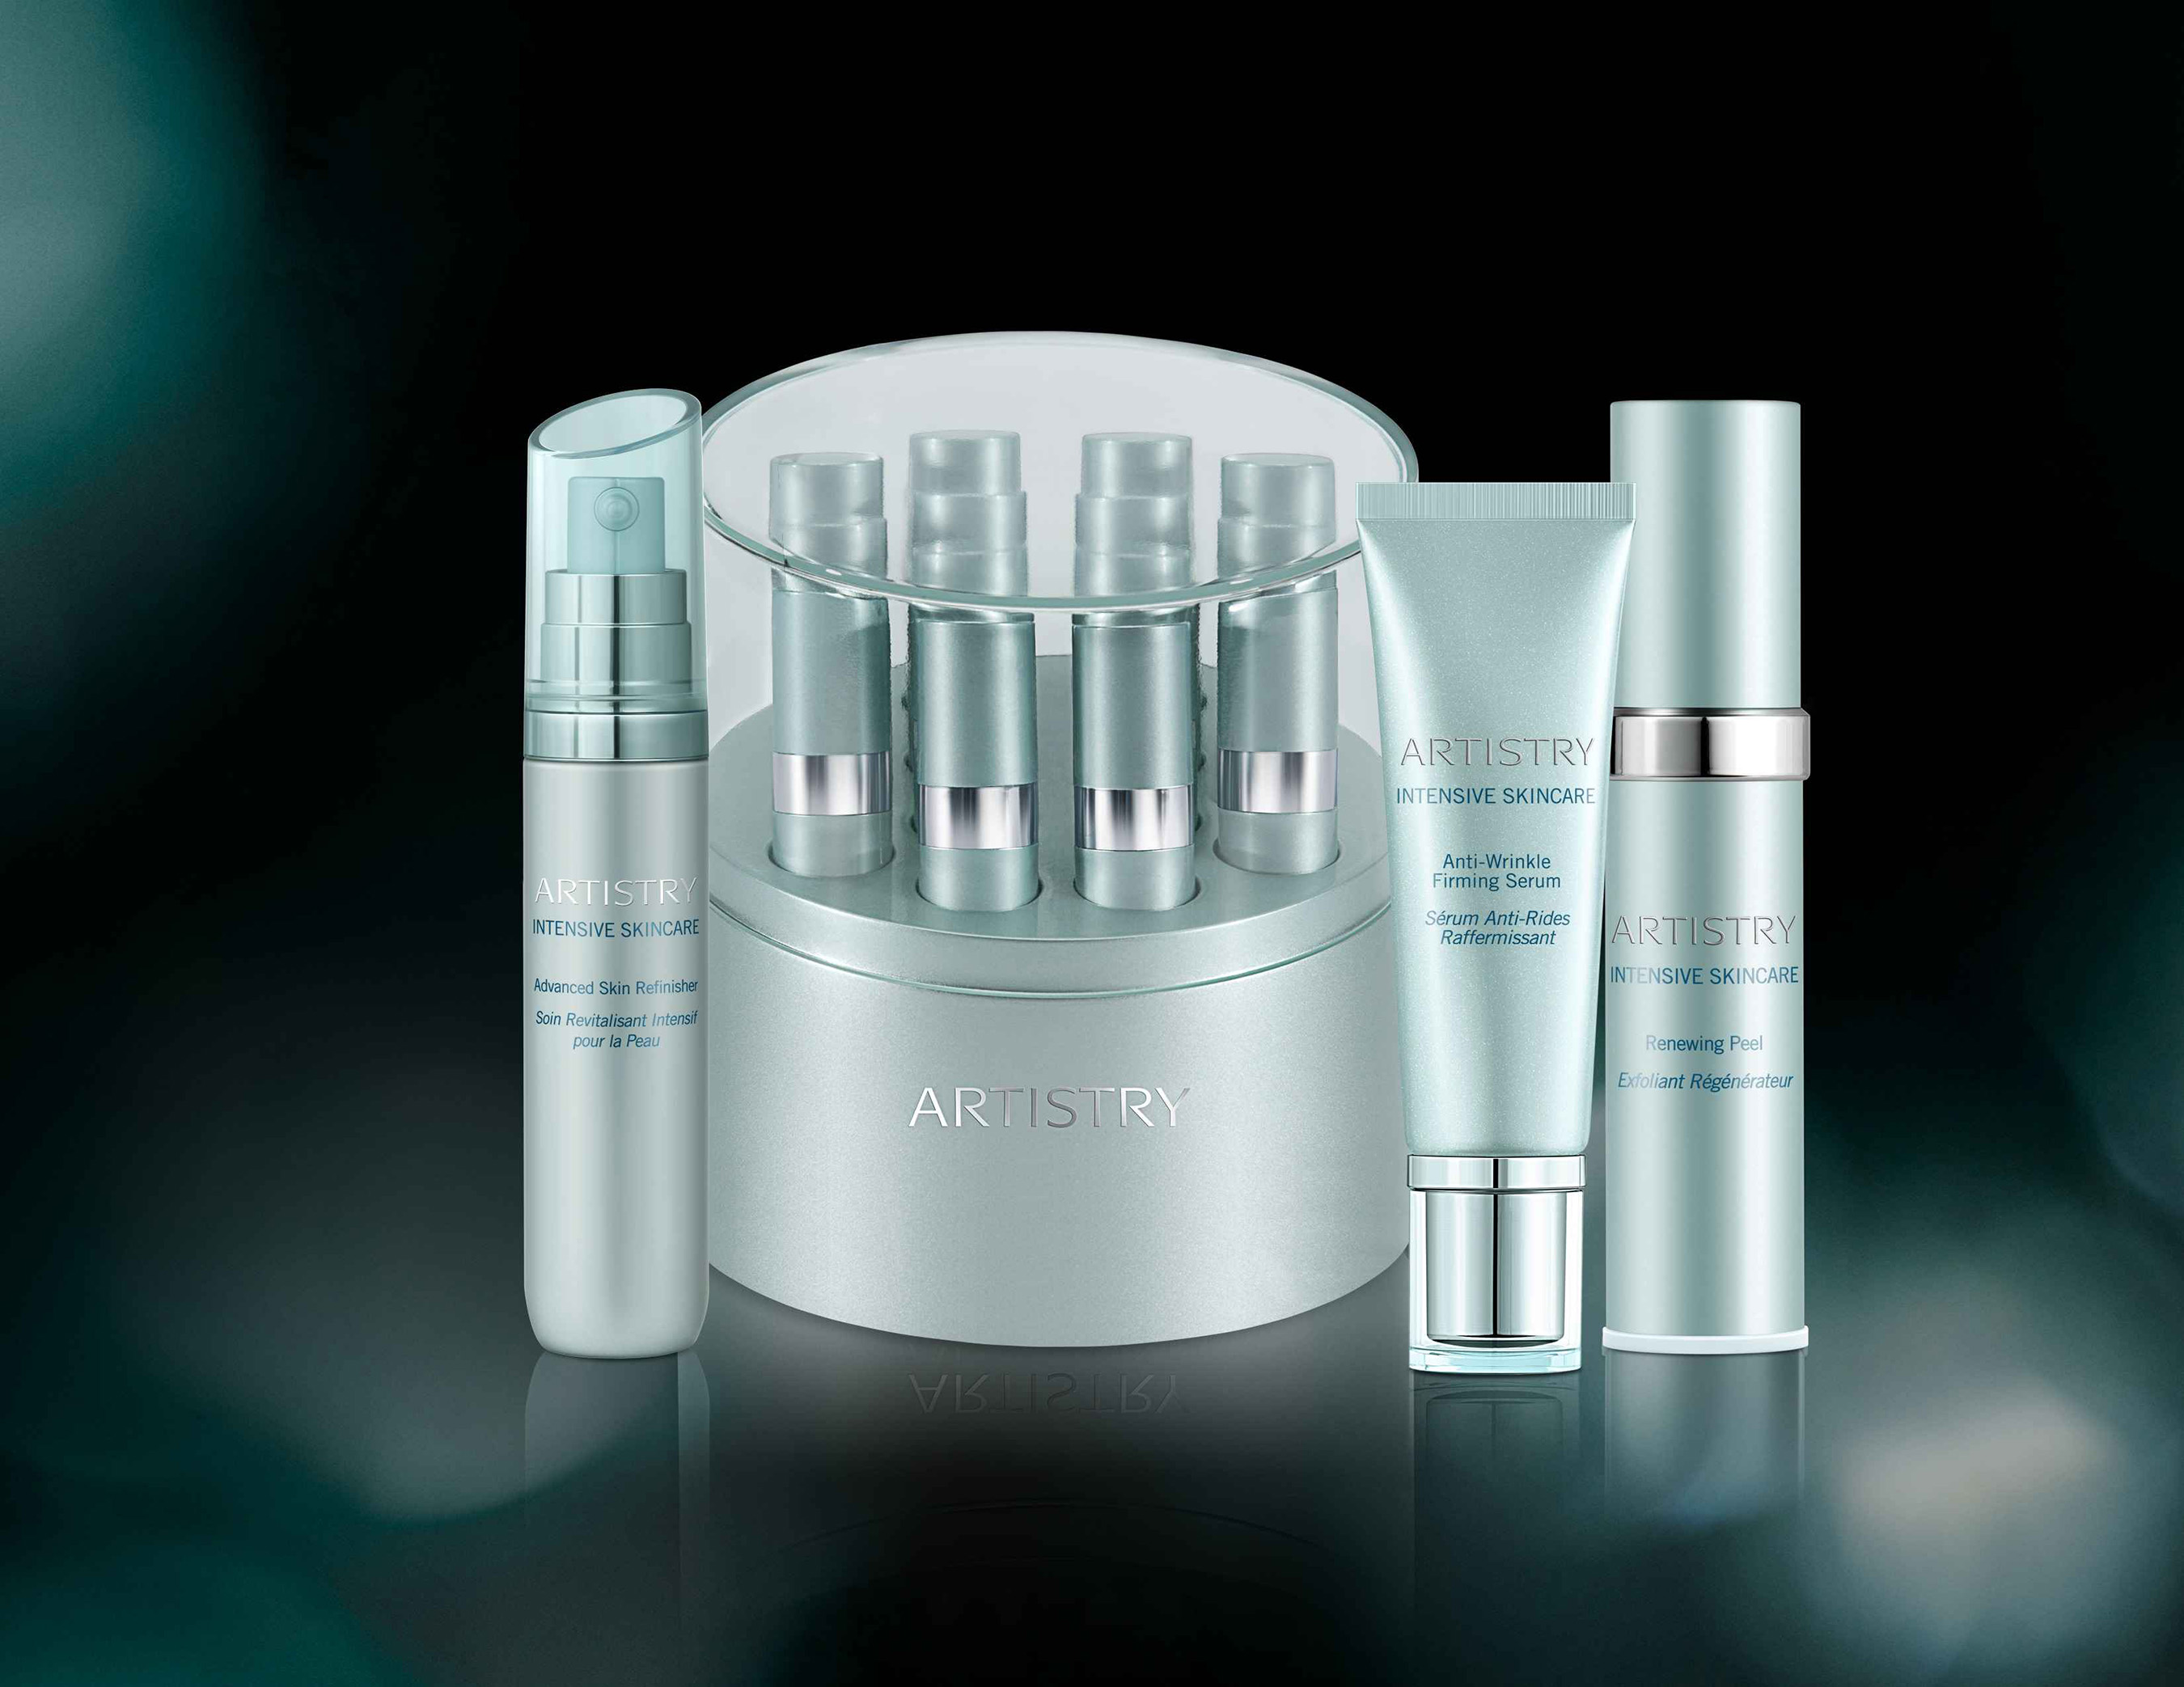 Artistry Intensive Skincare: at-home alternatives to dermatological treatments.